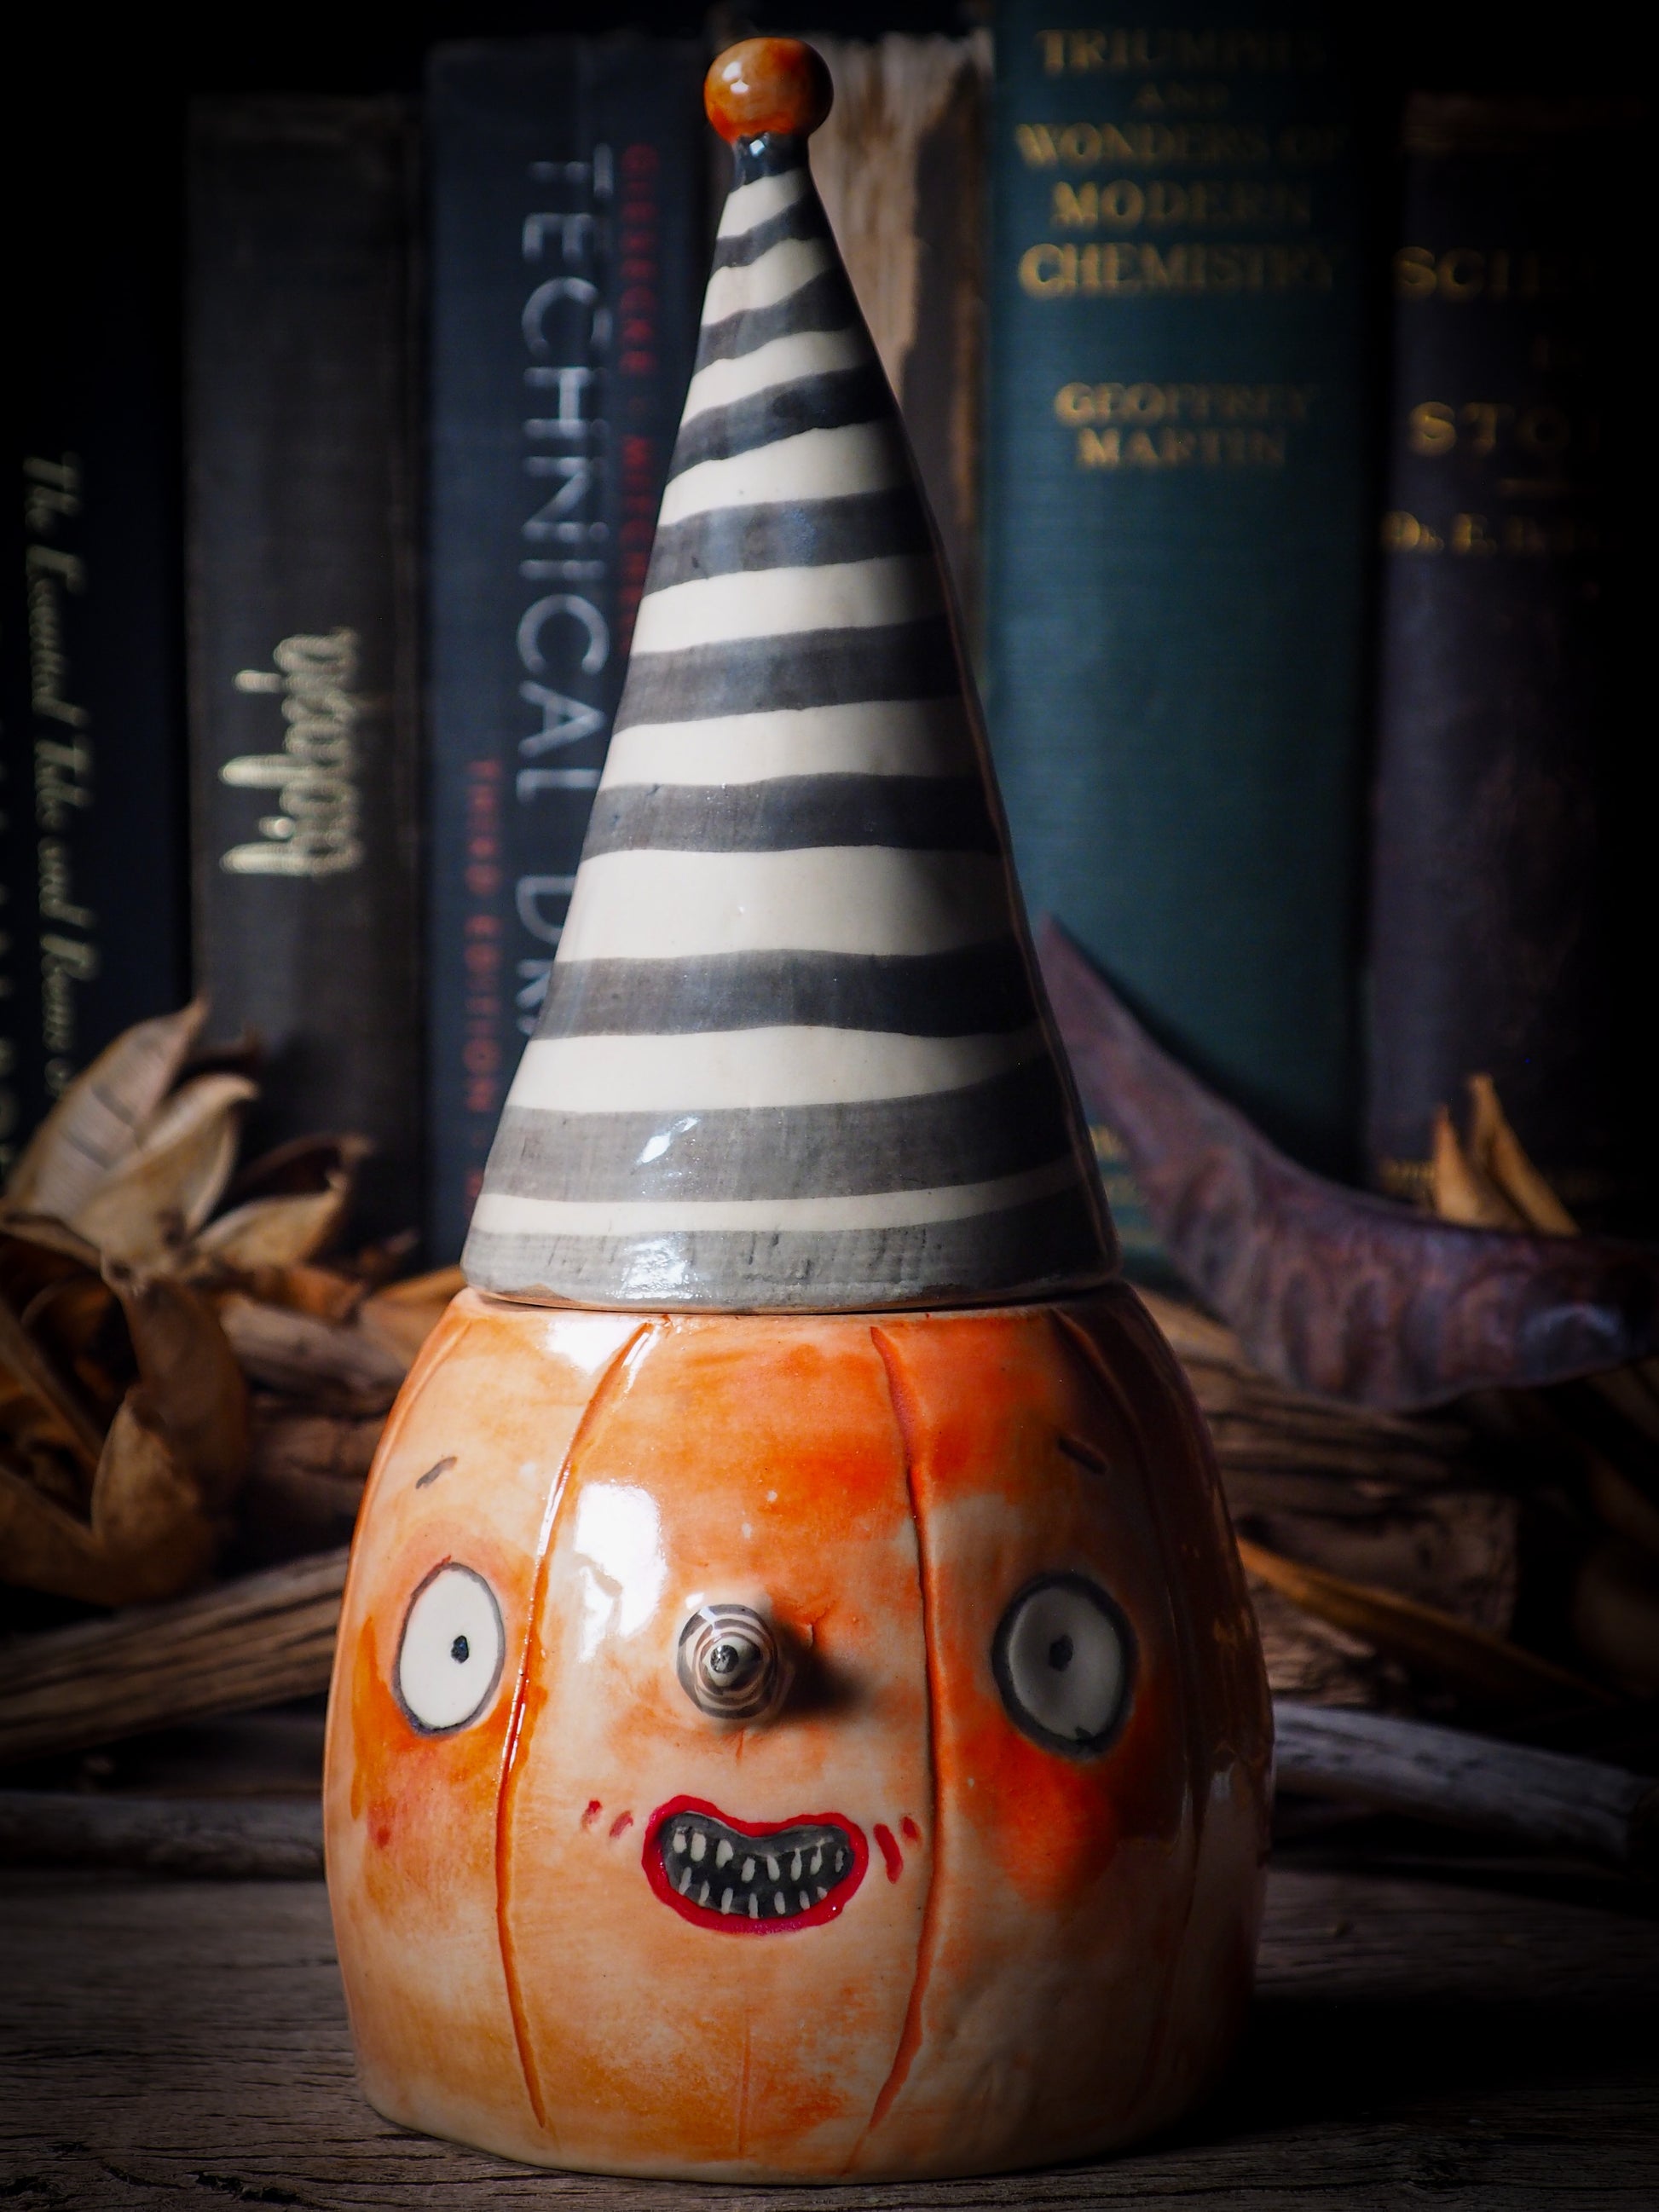 Fire glazed ceramic figurine by Idania Salcido, Danita Art. On Halloween, Danita creates spooky cute hand made ceramic figures to decorate your home in the scariest holiday of the year. Ghosts, witches, ghouls, vampires, black cats, pumpkins, jack-o-lantern and creatures of the night in glazed ceramic home decor.